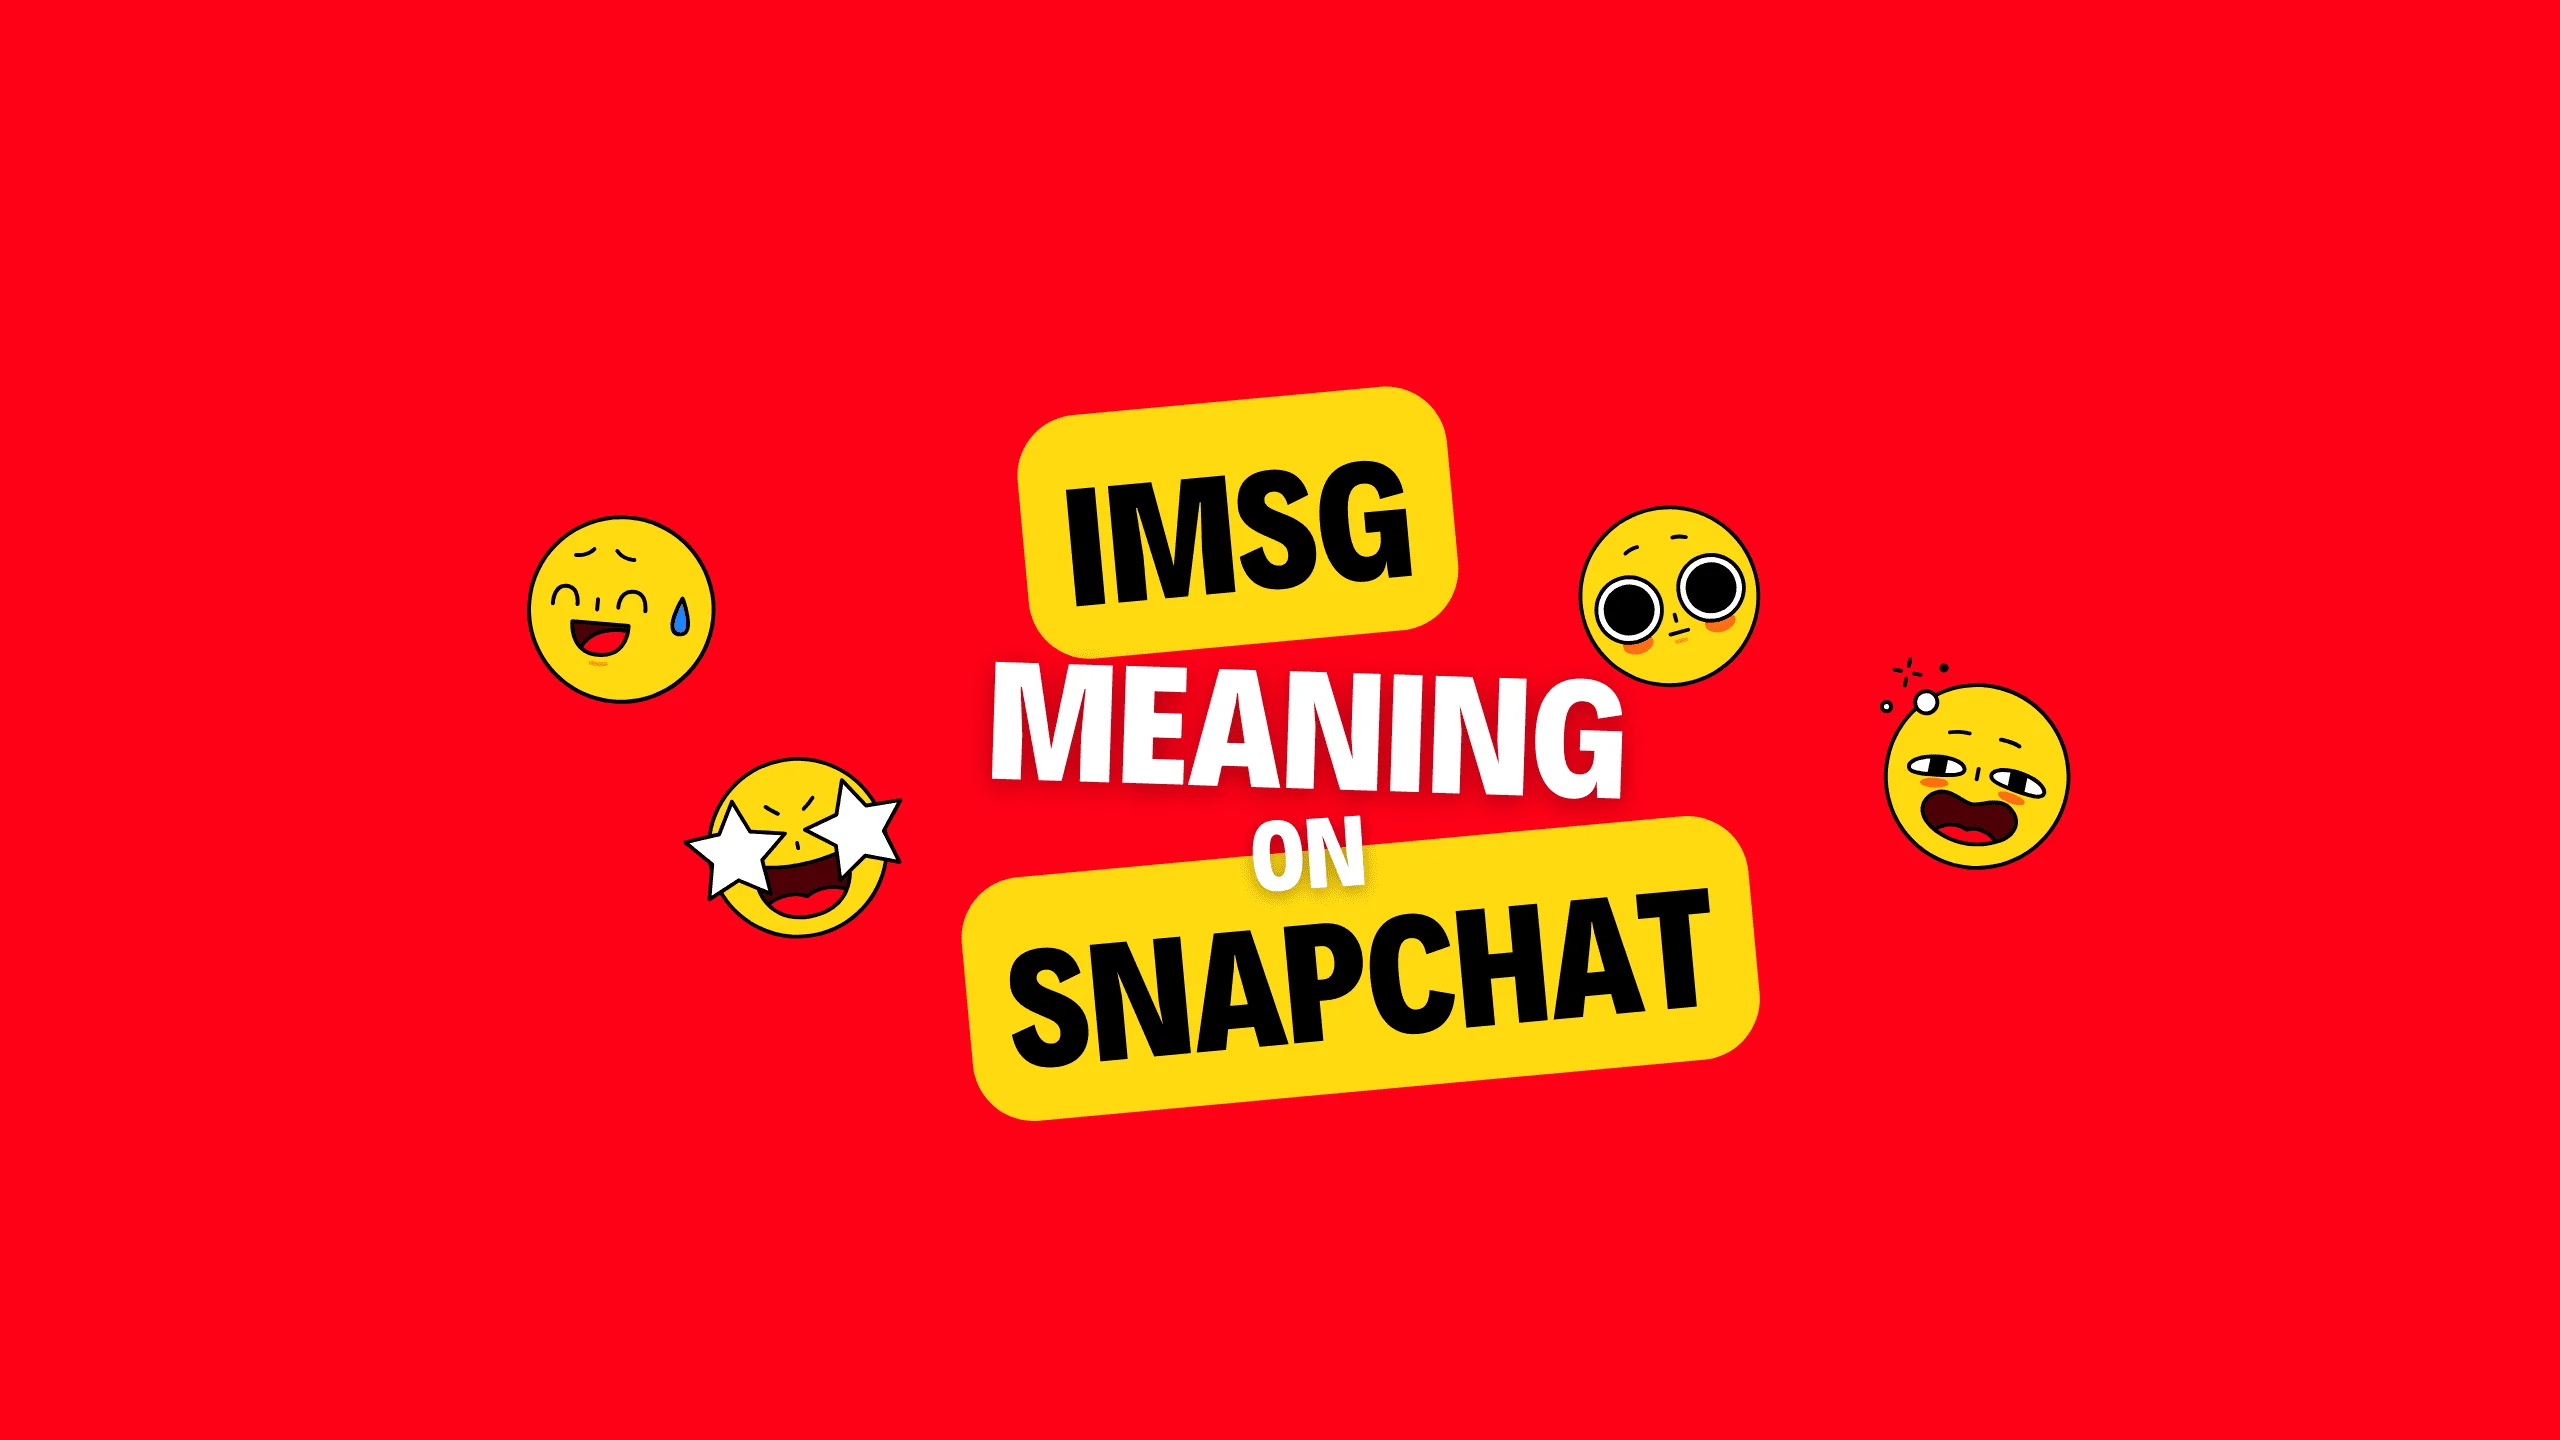 What Does IMSG Mean on Snapchat